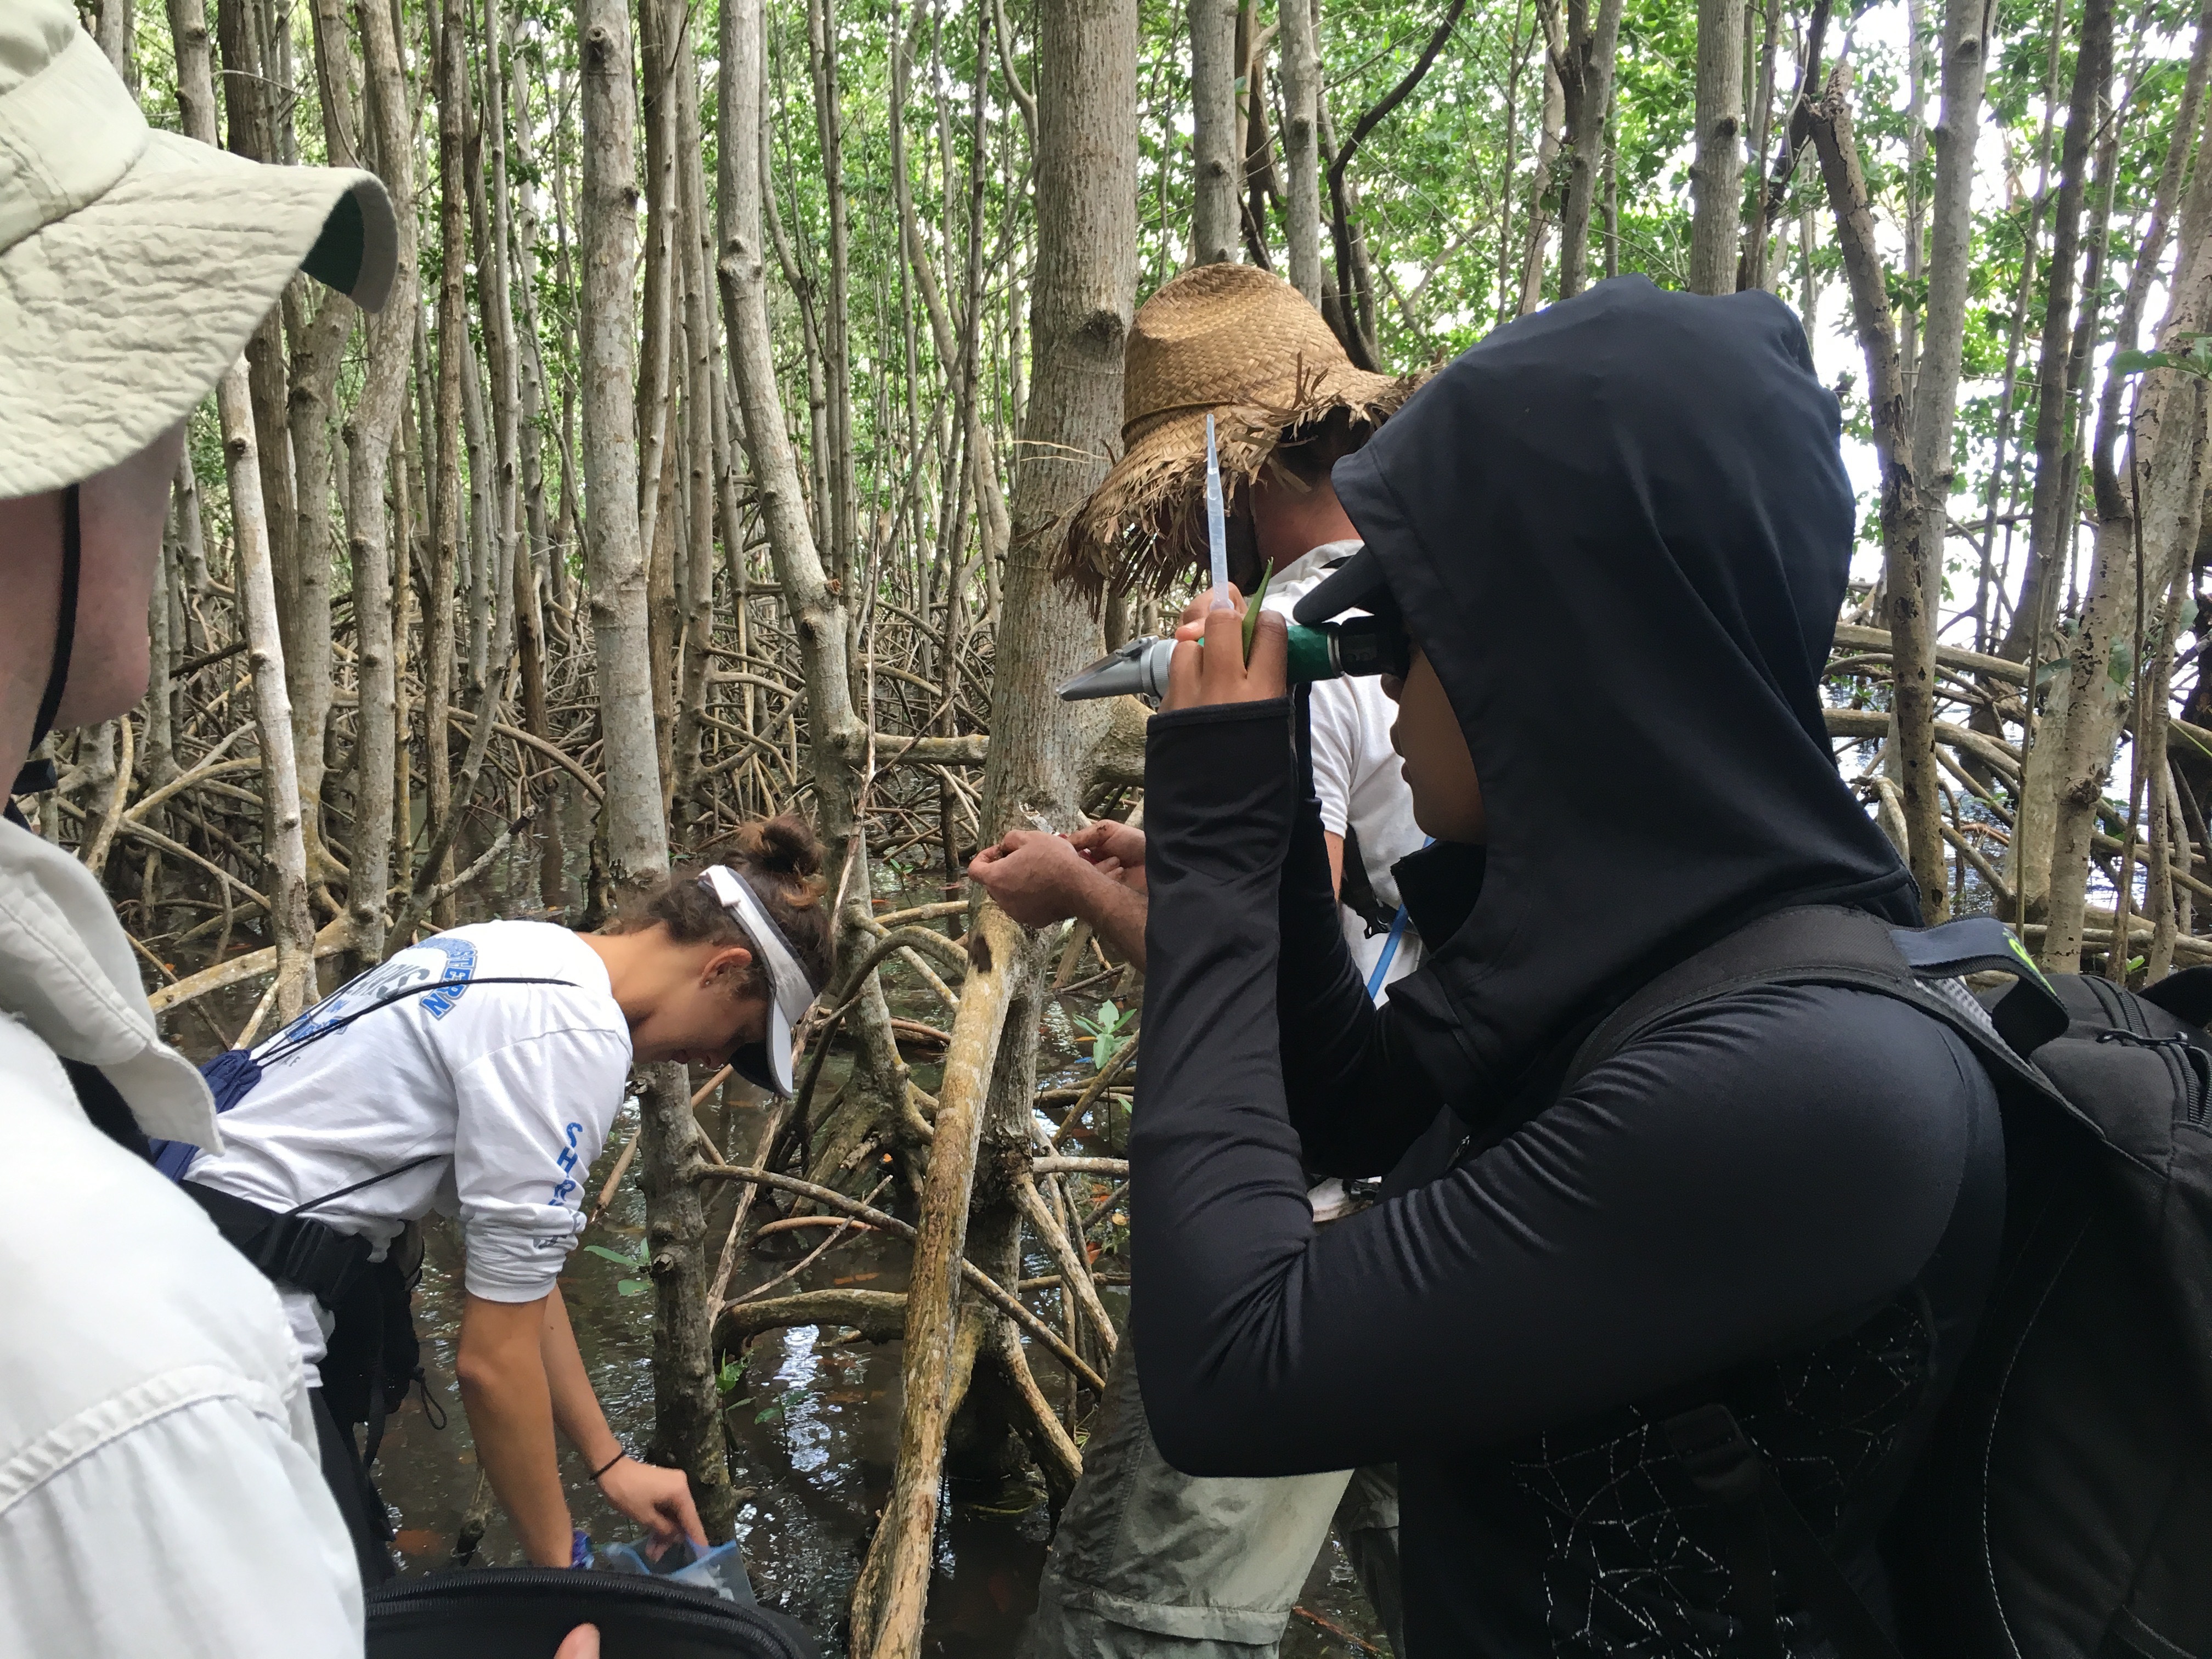 Priscilla Brown (FIU Teach Undergraduate, right foreground) using a salinity meter to measure salinity in Biscayne National Park.